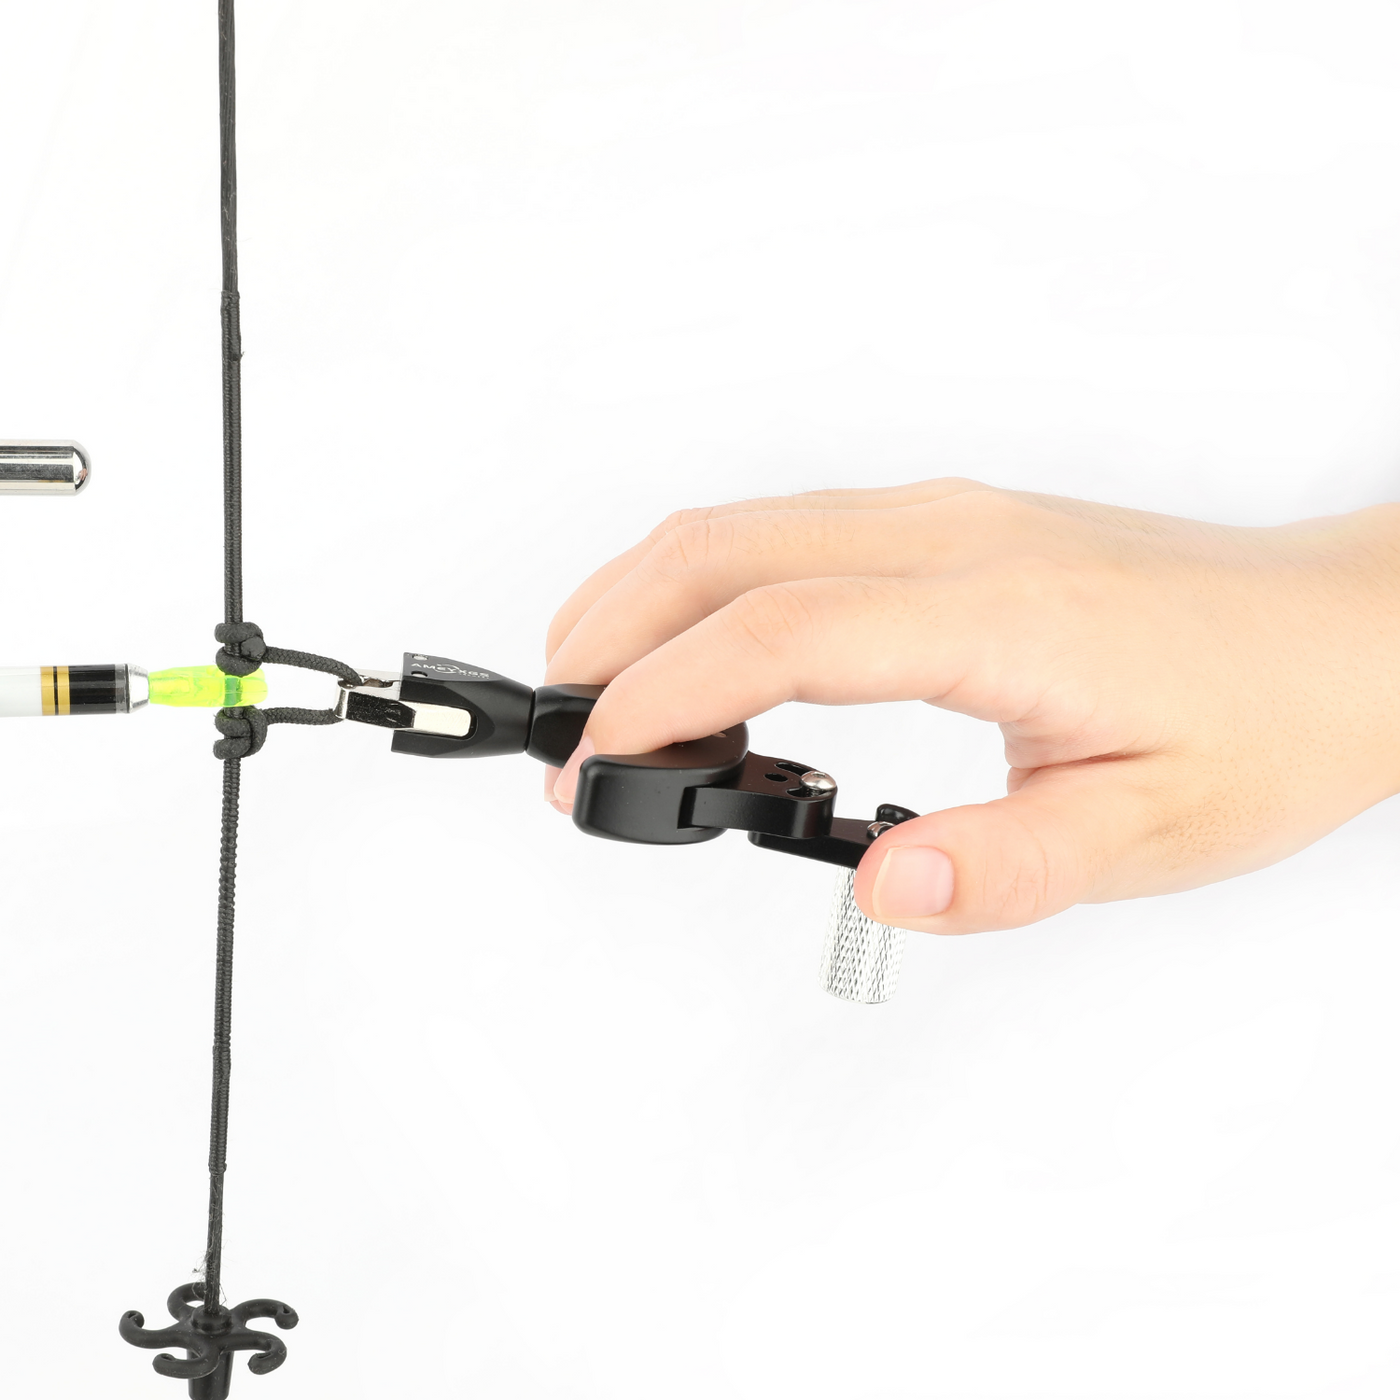 AMEYXGS 4 Finger Release Aids Thumb Trigger Compound Bow